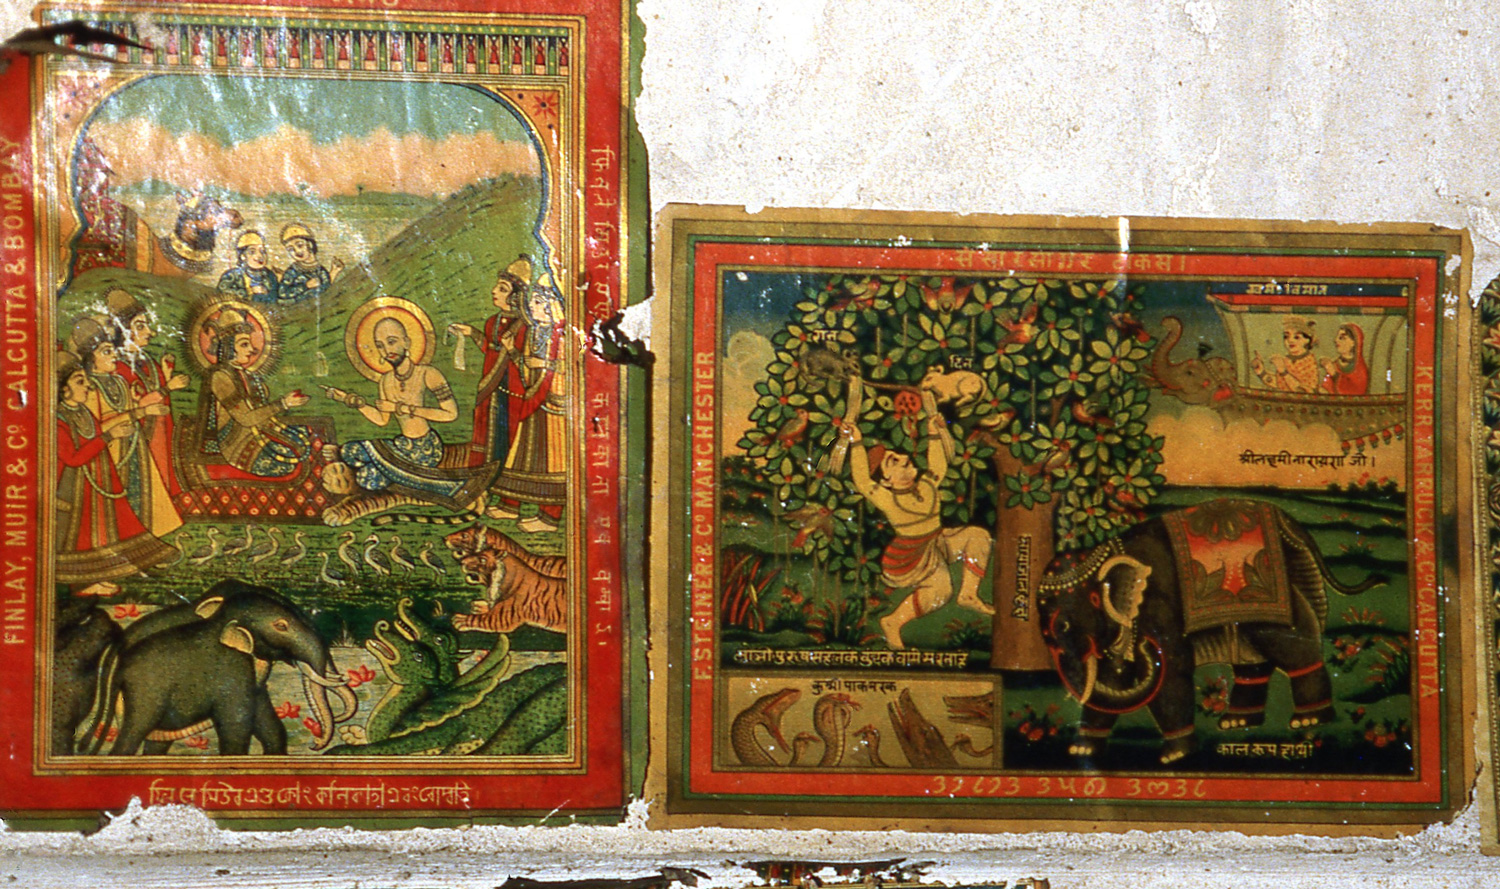 Late 19th century textile labels glued to a haveli wall. That on the right, printed by a Manchester company. inspired several copies on walls in Mandawa. The other, illustrating the Laila-Majnu tale. was also copied